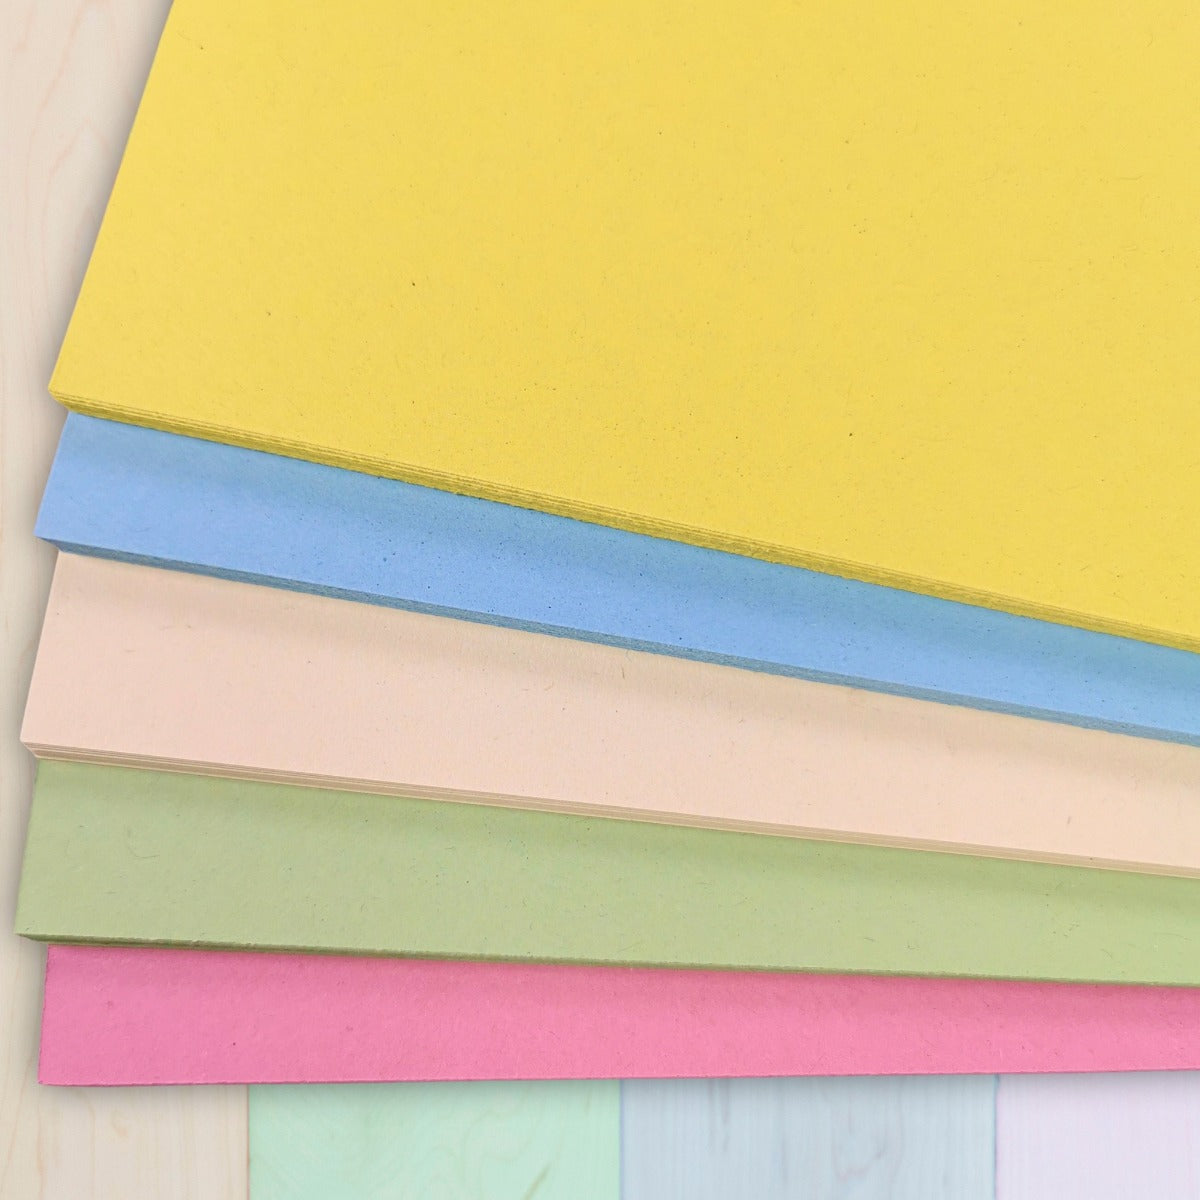 A3 100% Recycled Pastel Coloured Card in 180gsm Choose Quantity